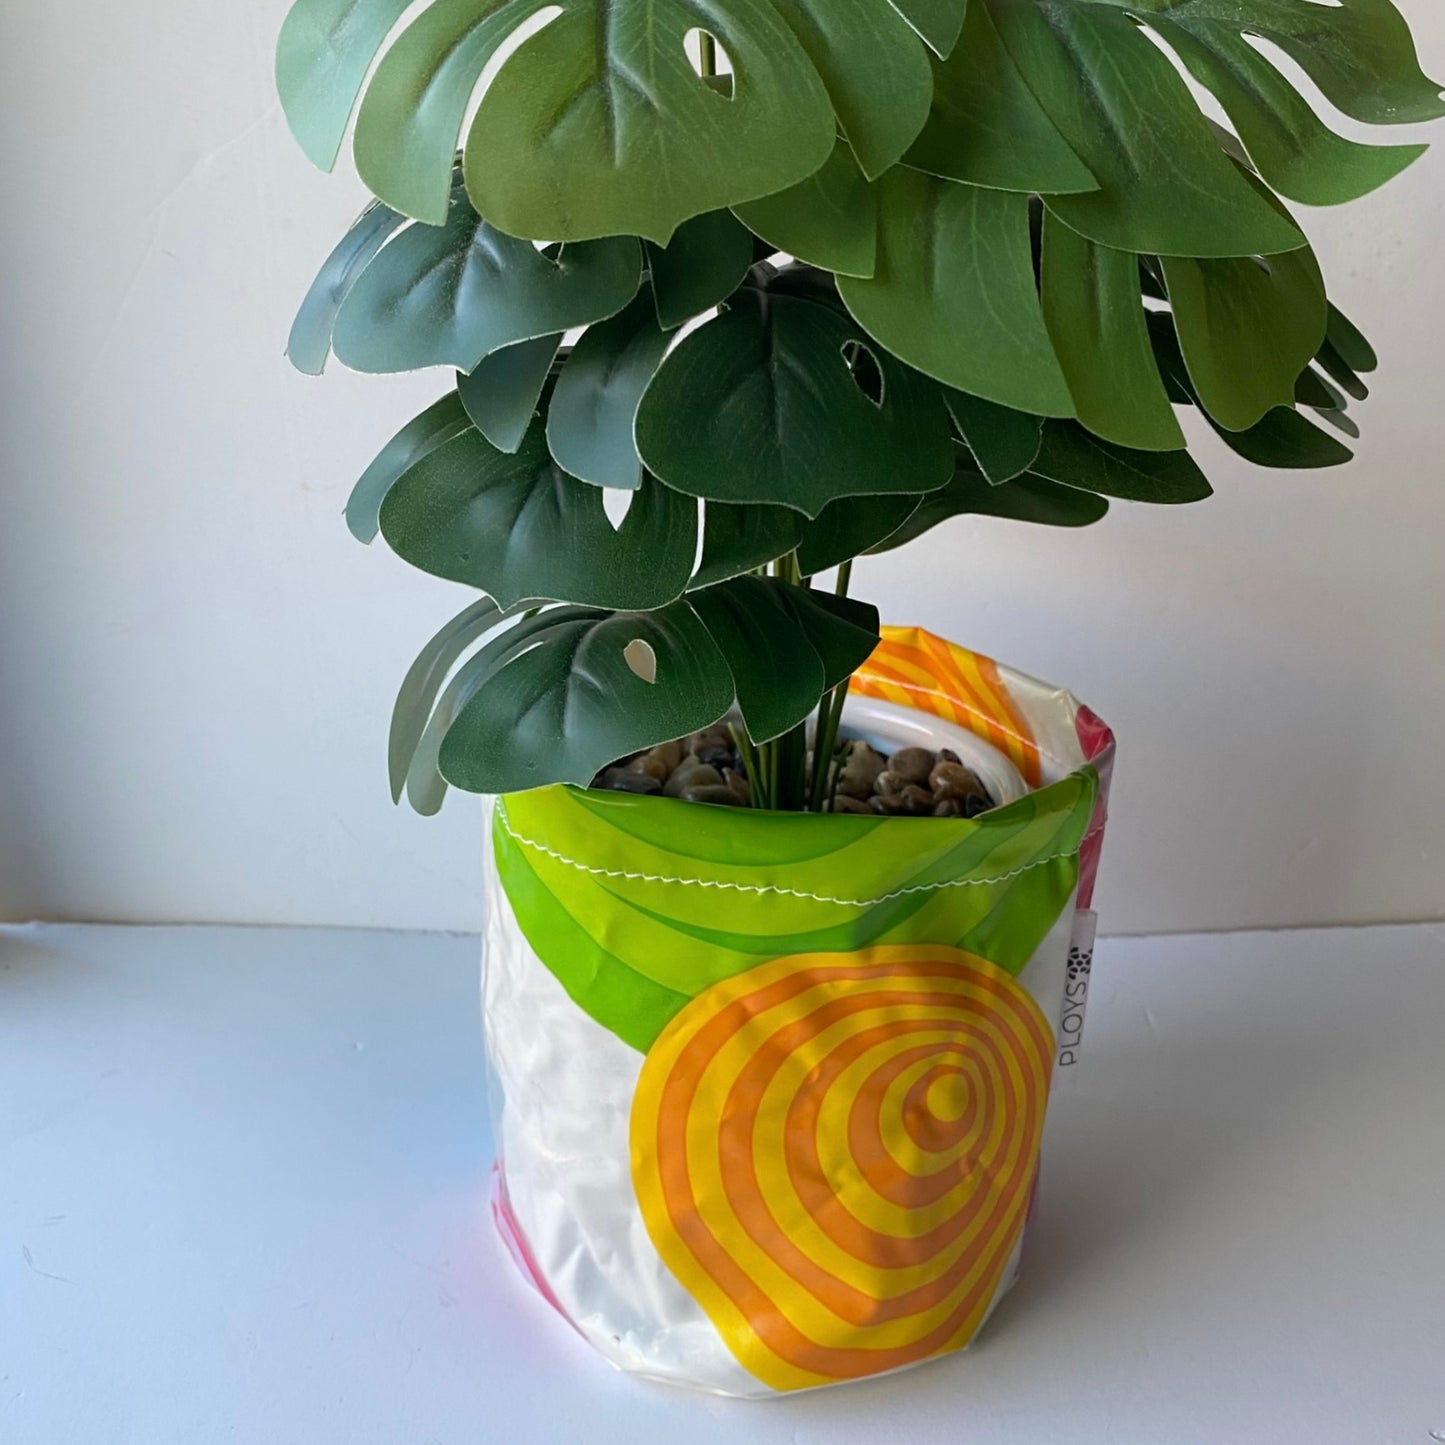 Planter, Plant pot, Storage basket or Desk Caddy - recycled inflatables